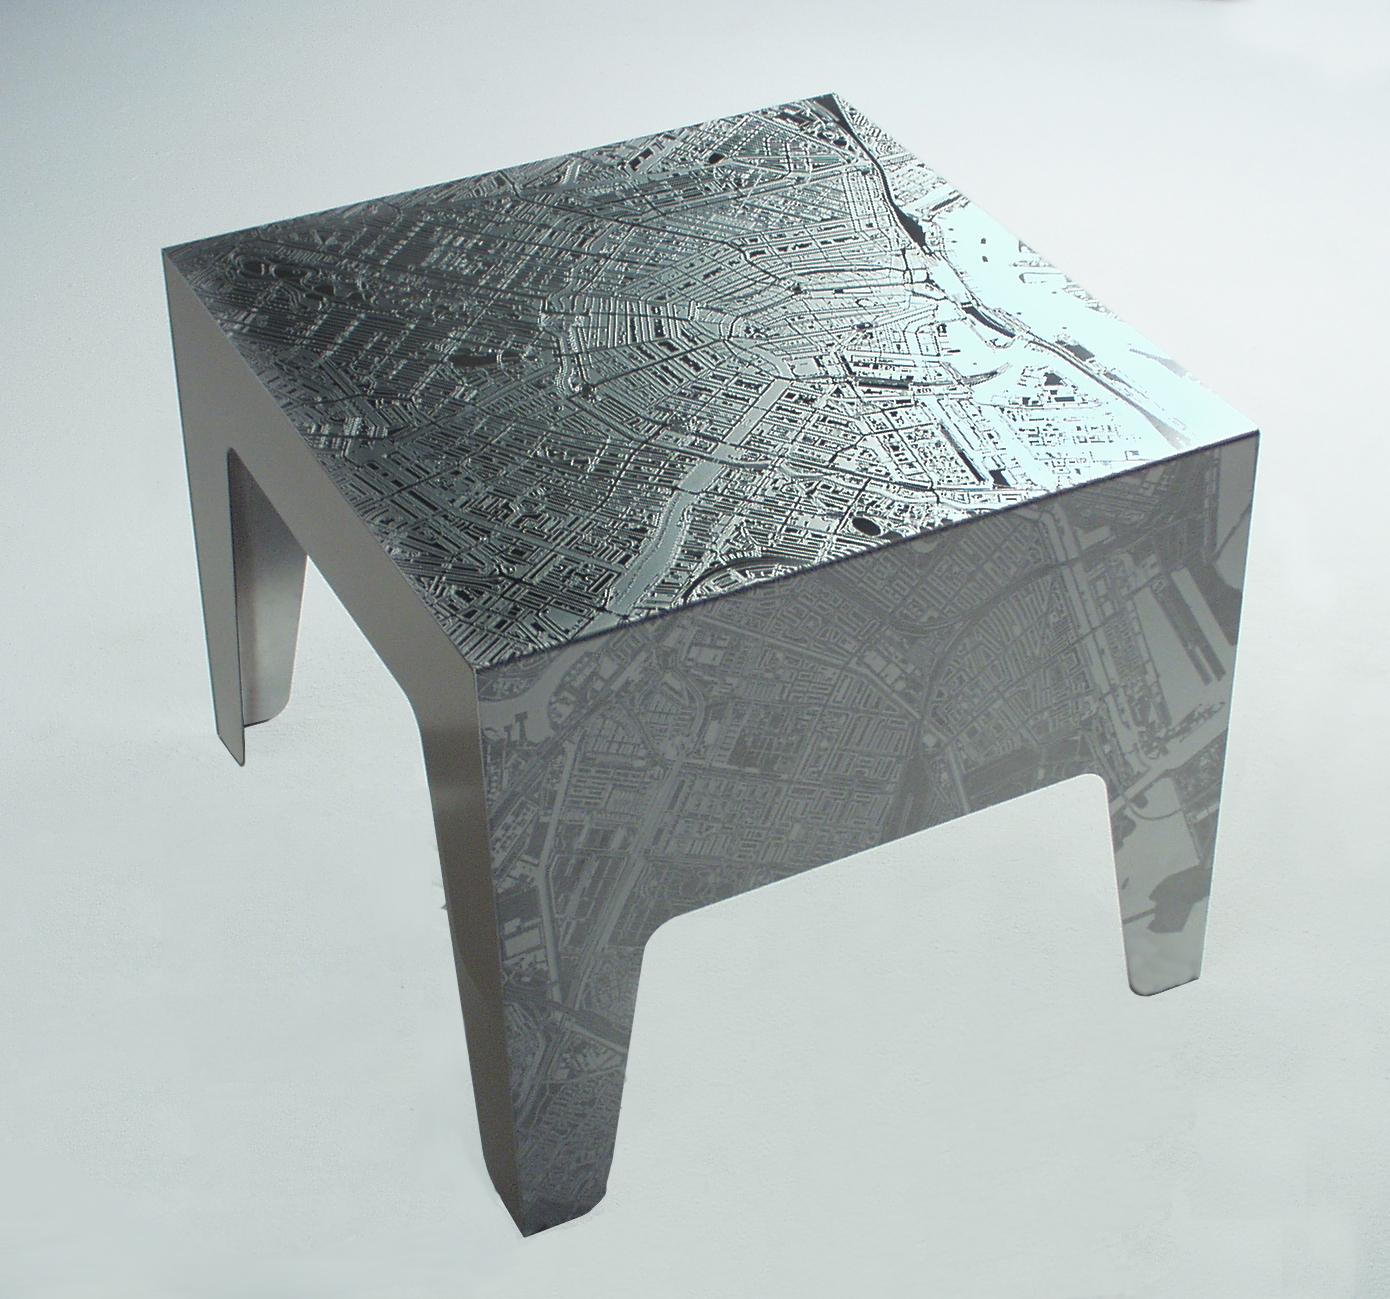 Contemporary Amsterdam Table, by Marcel Wanders, Etched Stainless Steel, 2000, #2/5